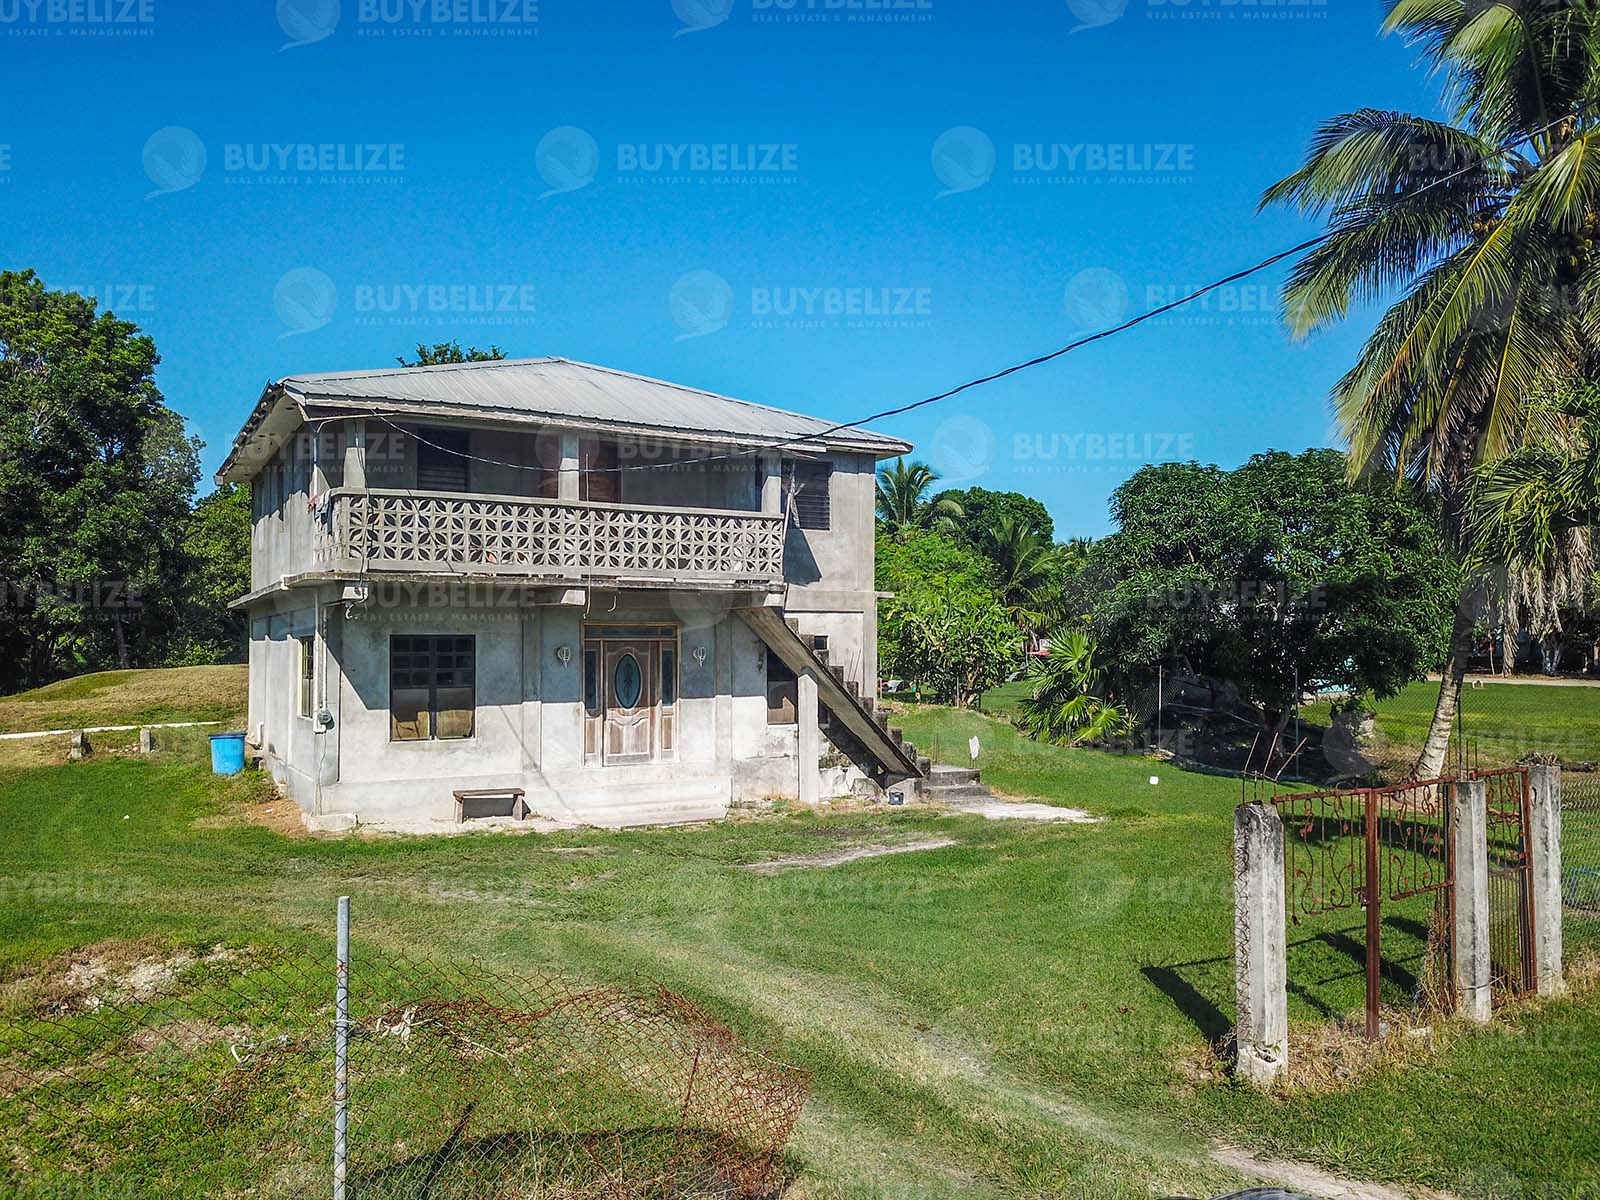 Two Story Concrete House For Sale in Corozal District, Belize